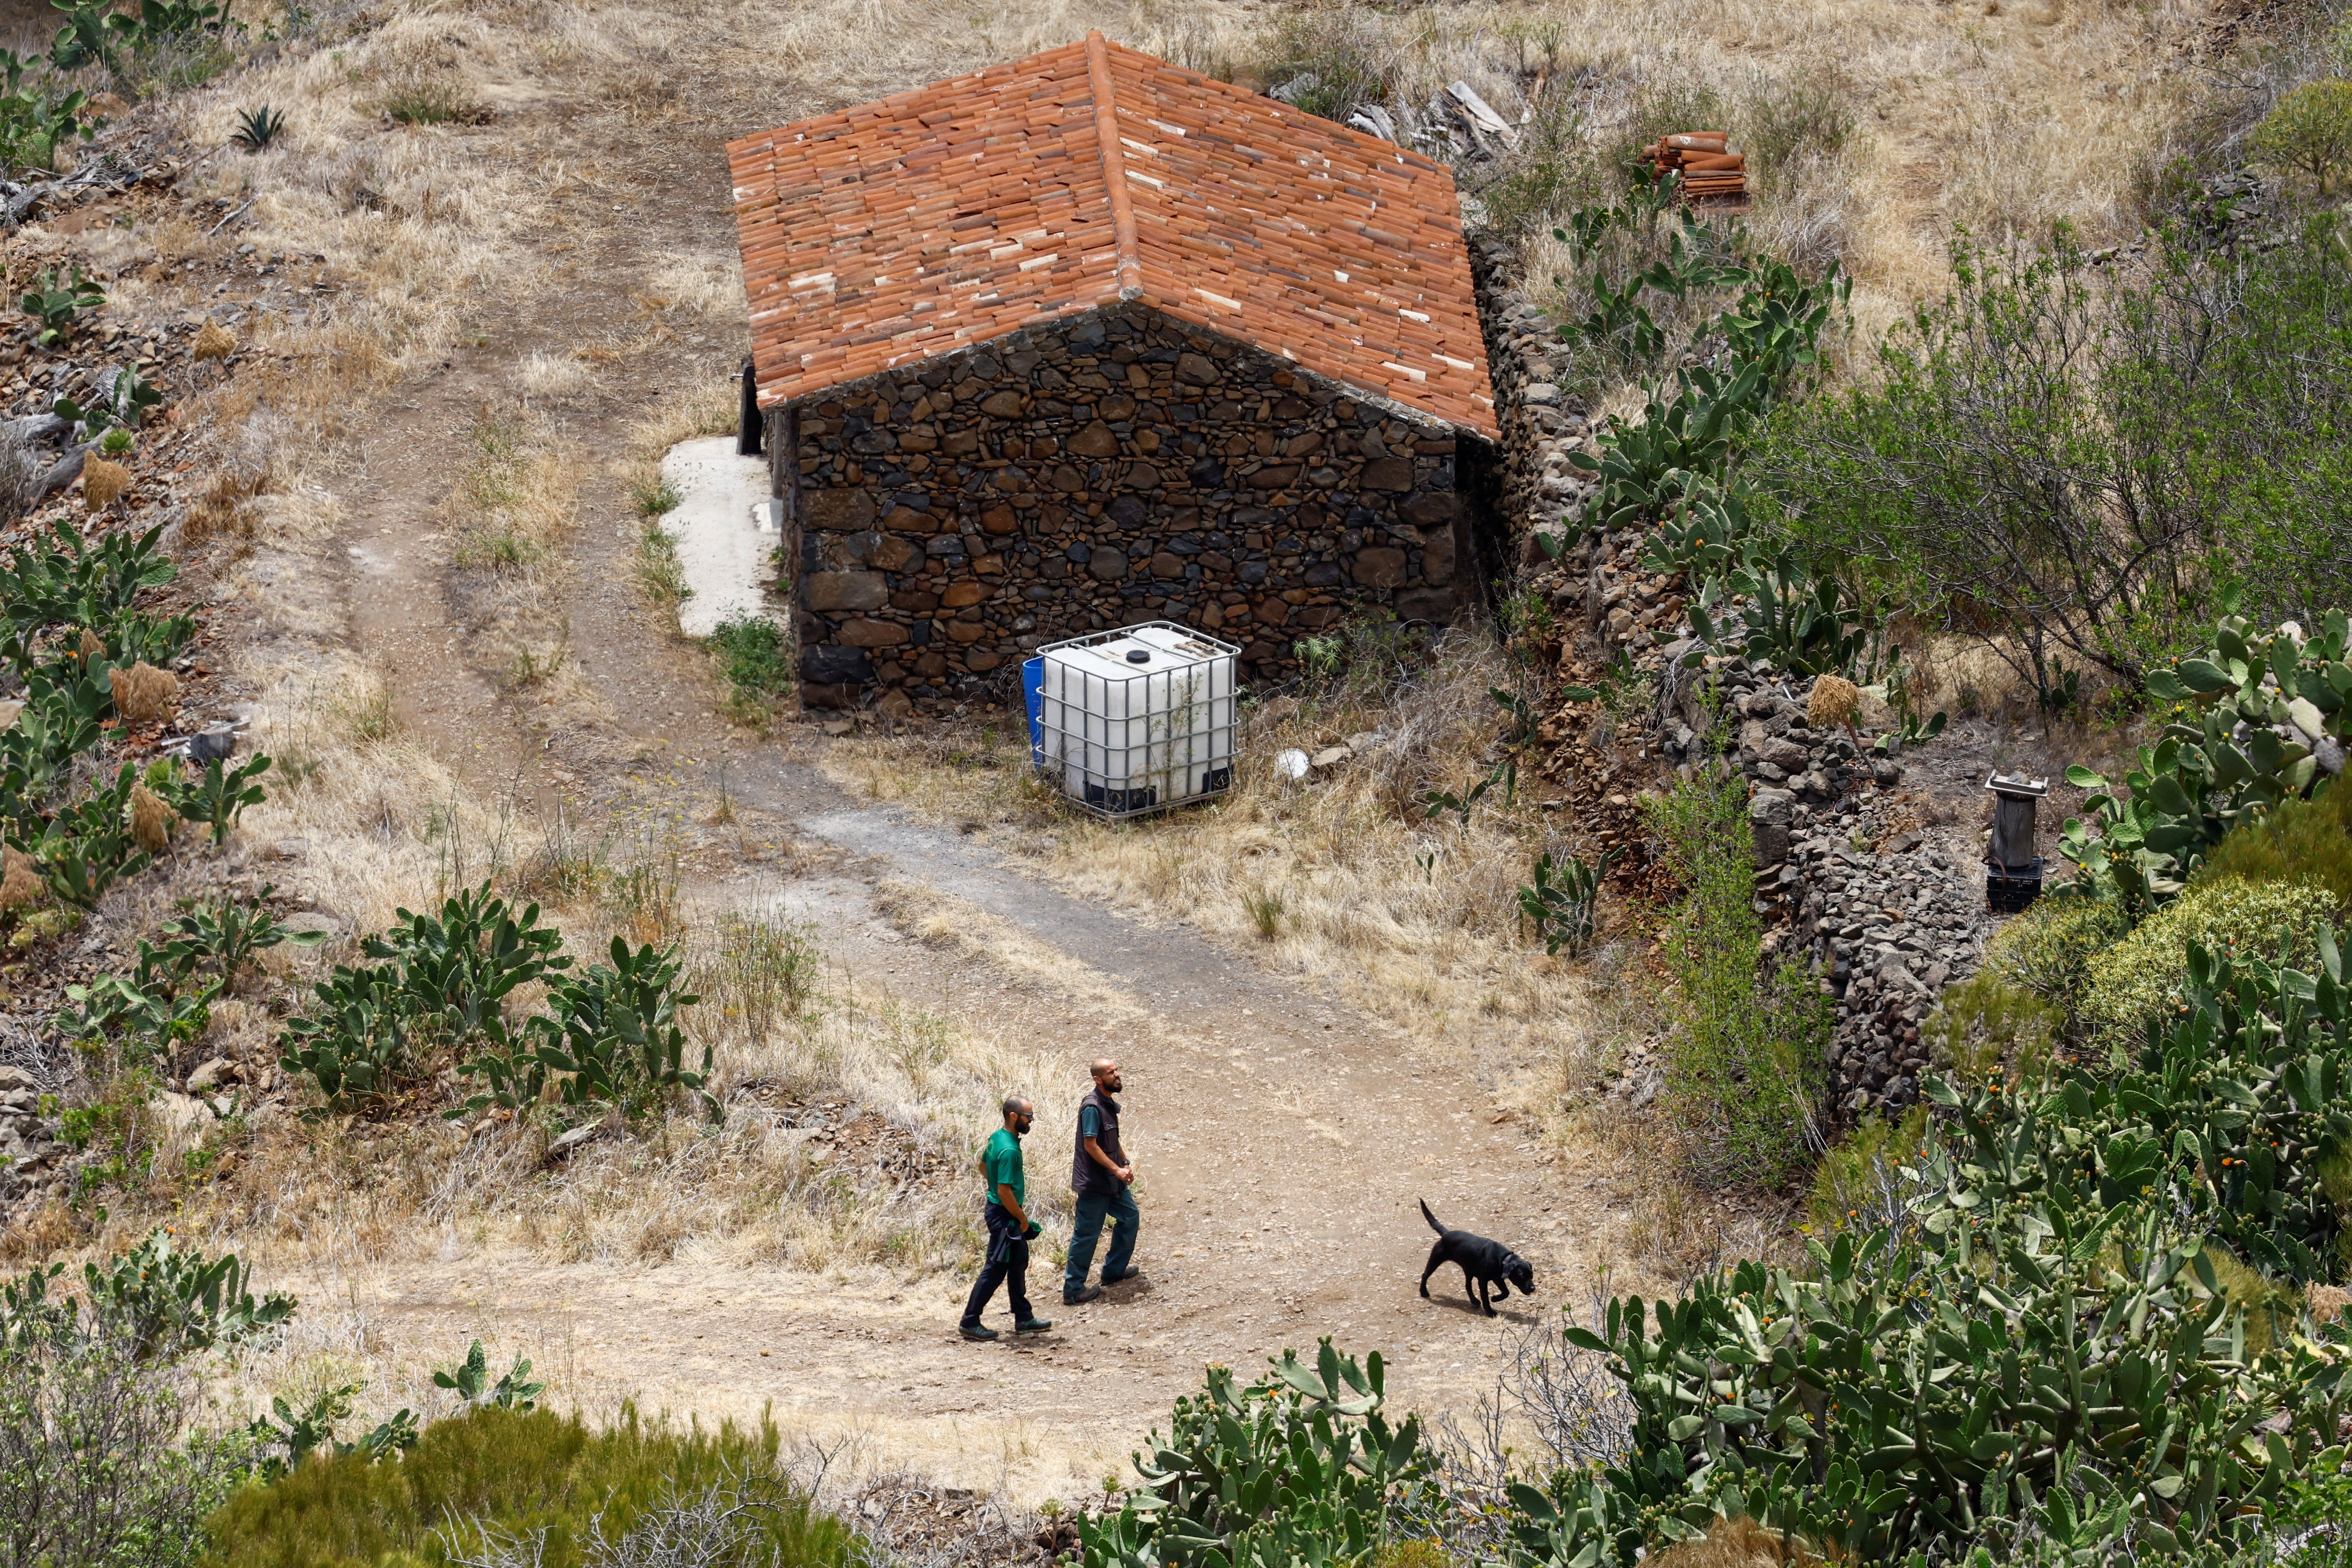 Spanish police searching for the missing teenager near the village of Masca